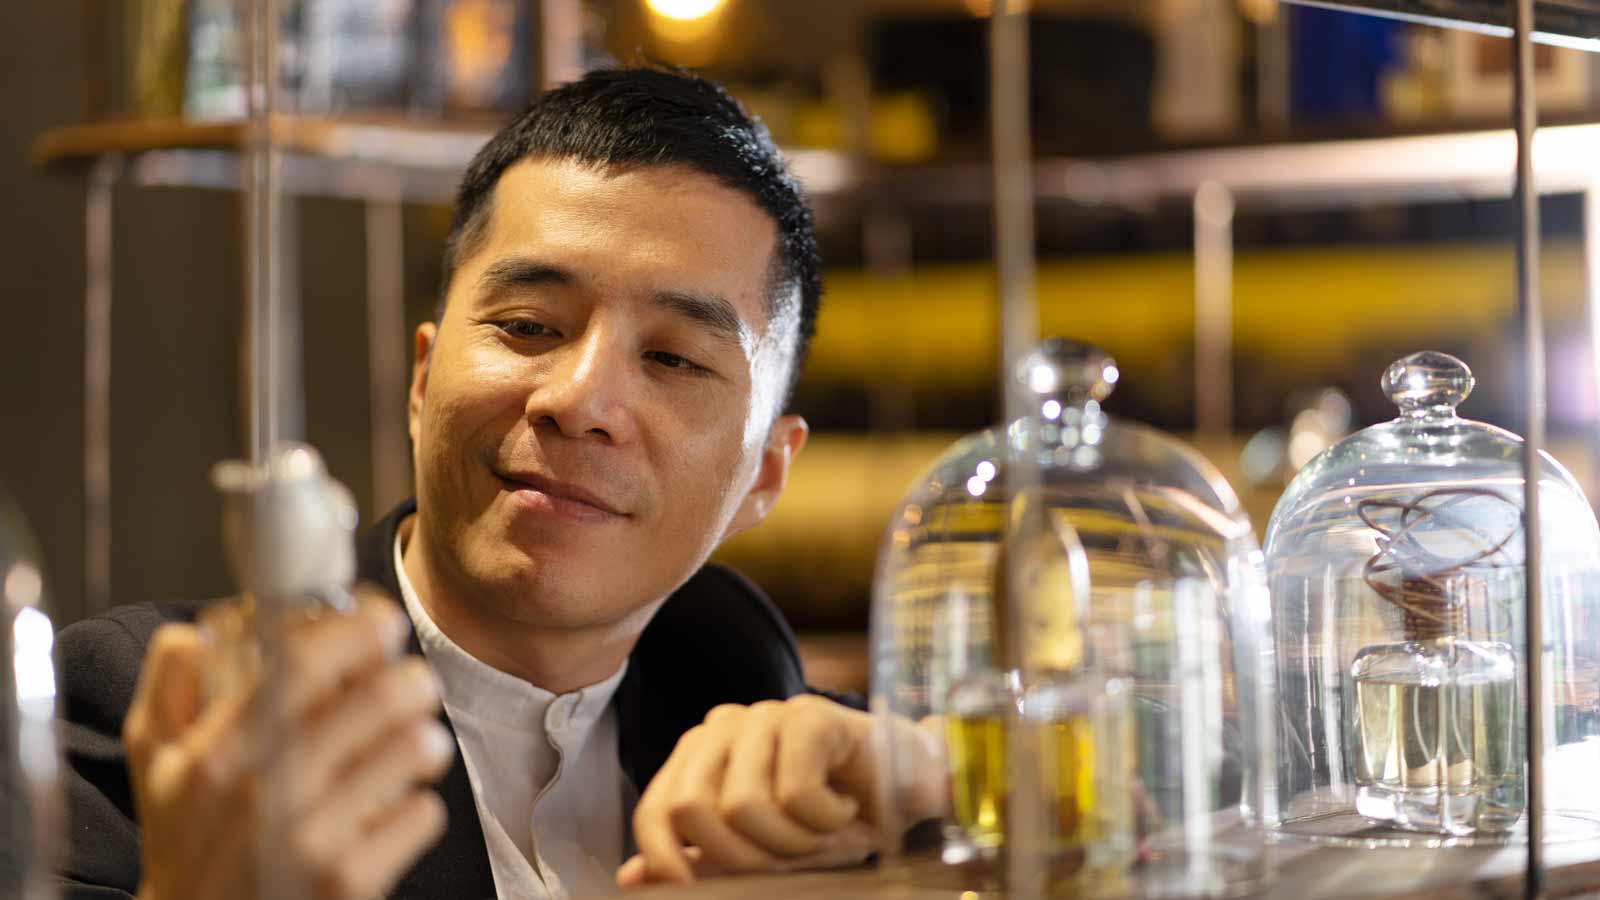 Entrepreneur Eric Tran shared: scent has two aspects: applicability and art - aesthetics